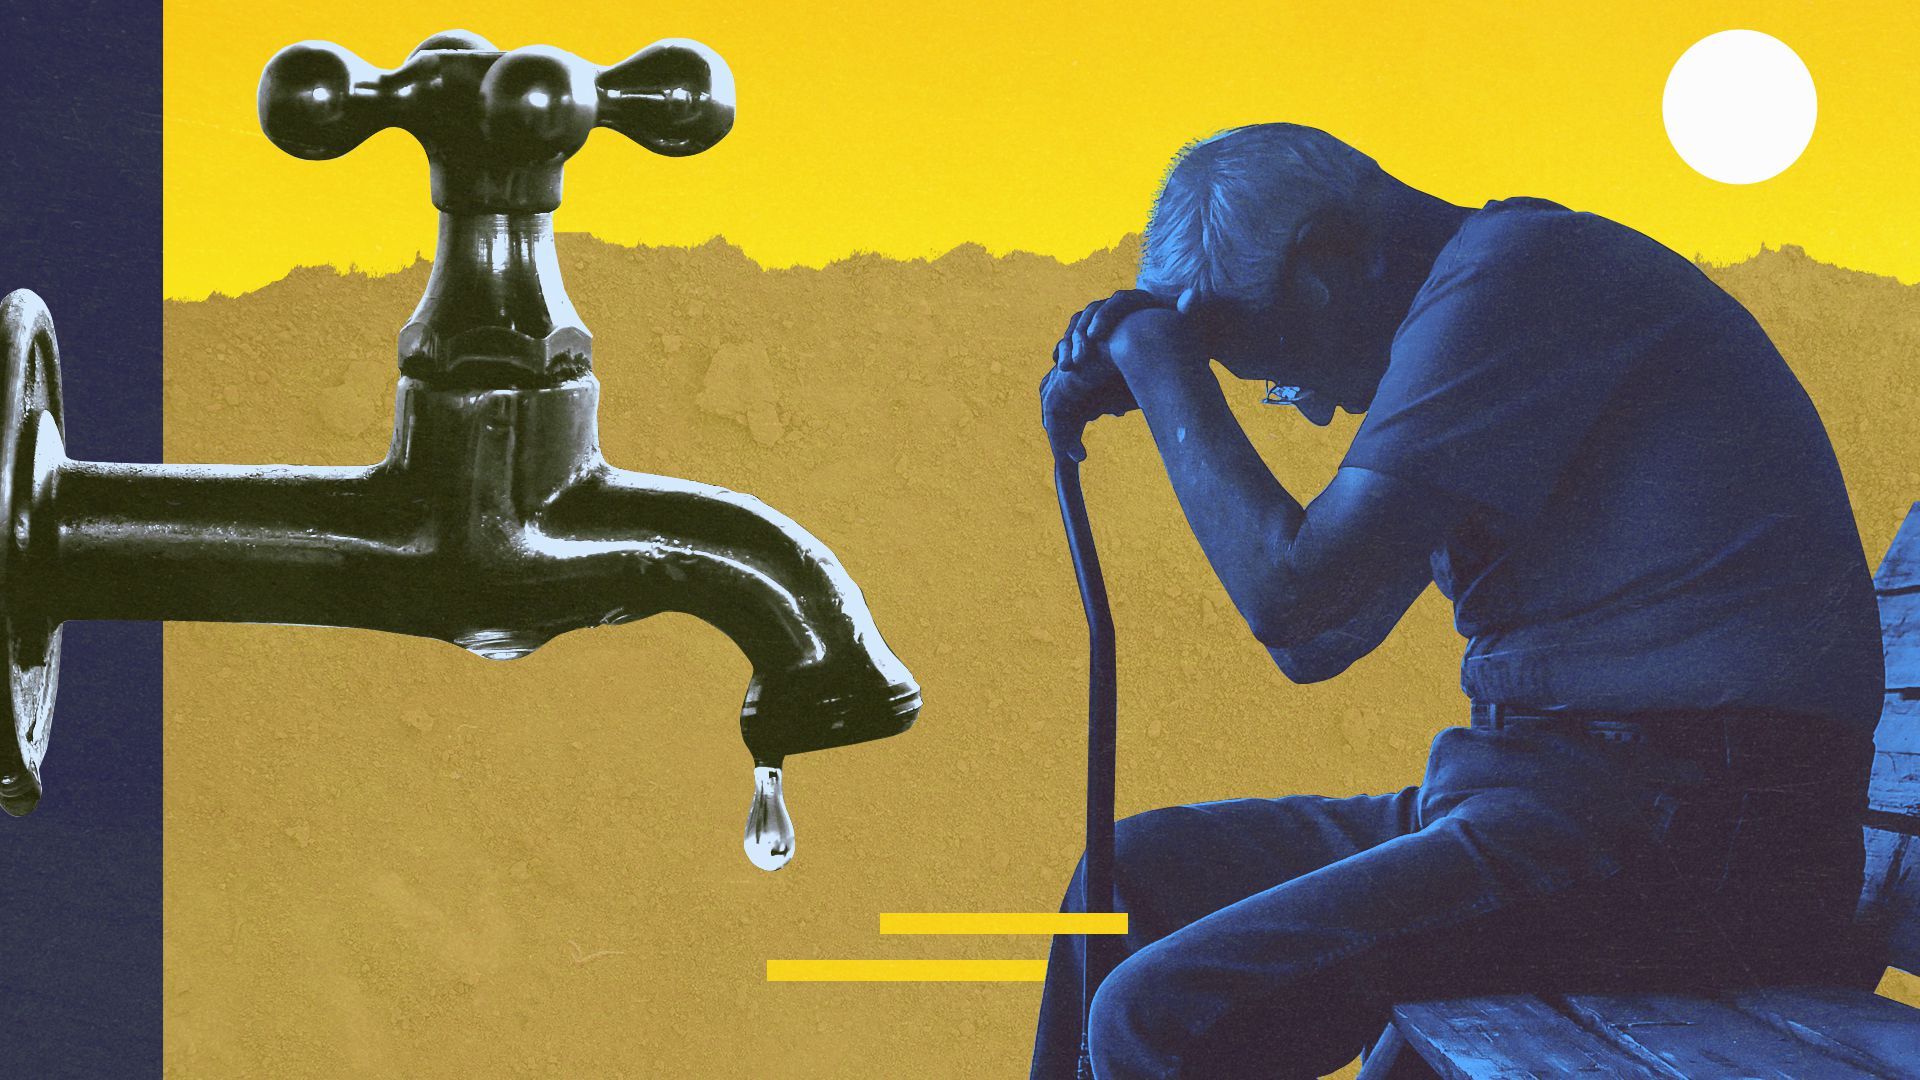 Photo illustration of an elderly person resting on a cane, a large dripping faucet and desert landscape.